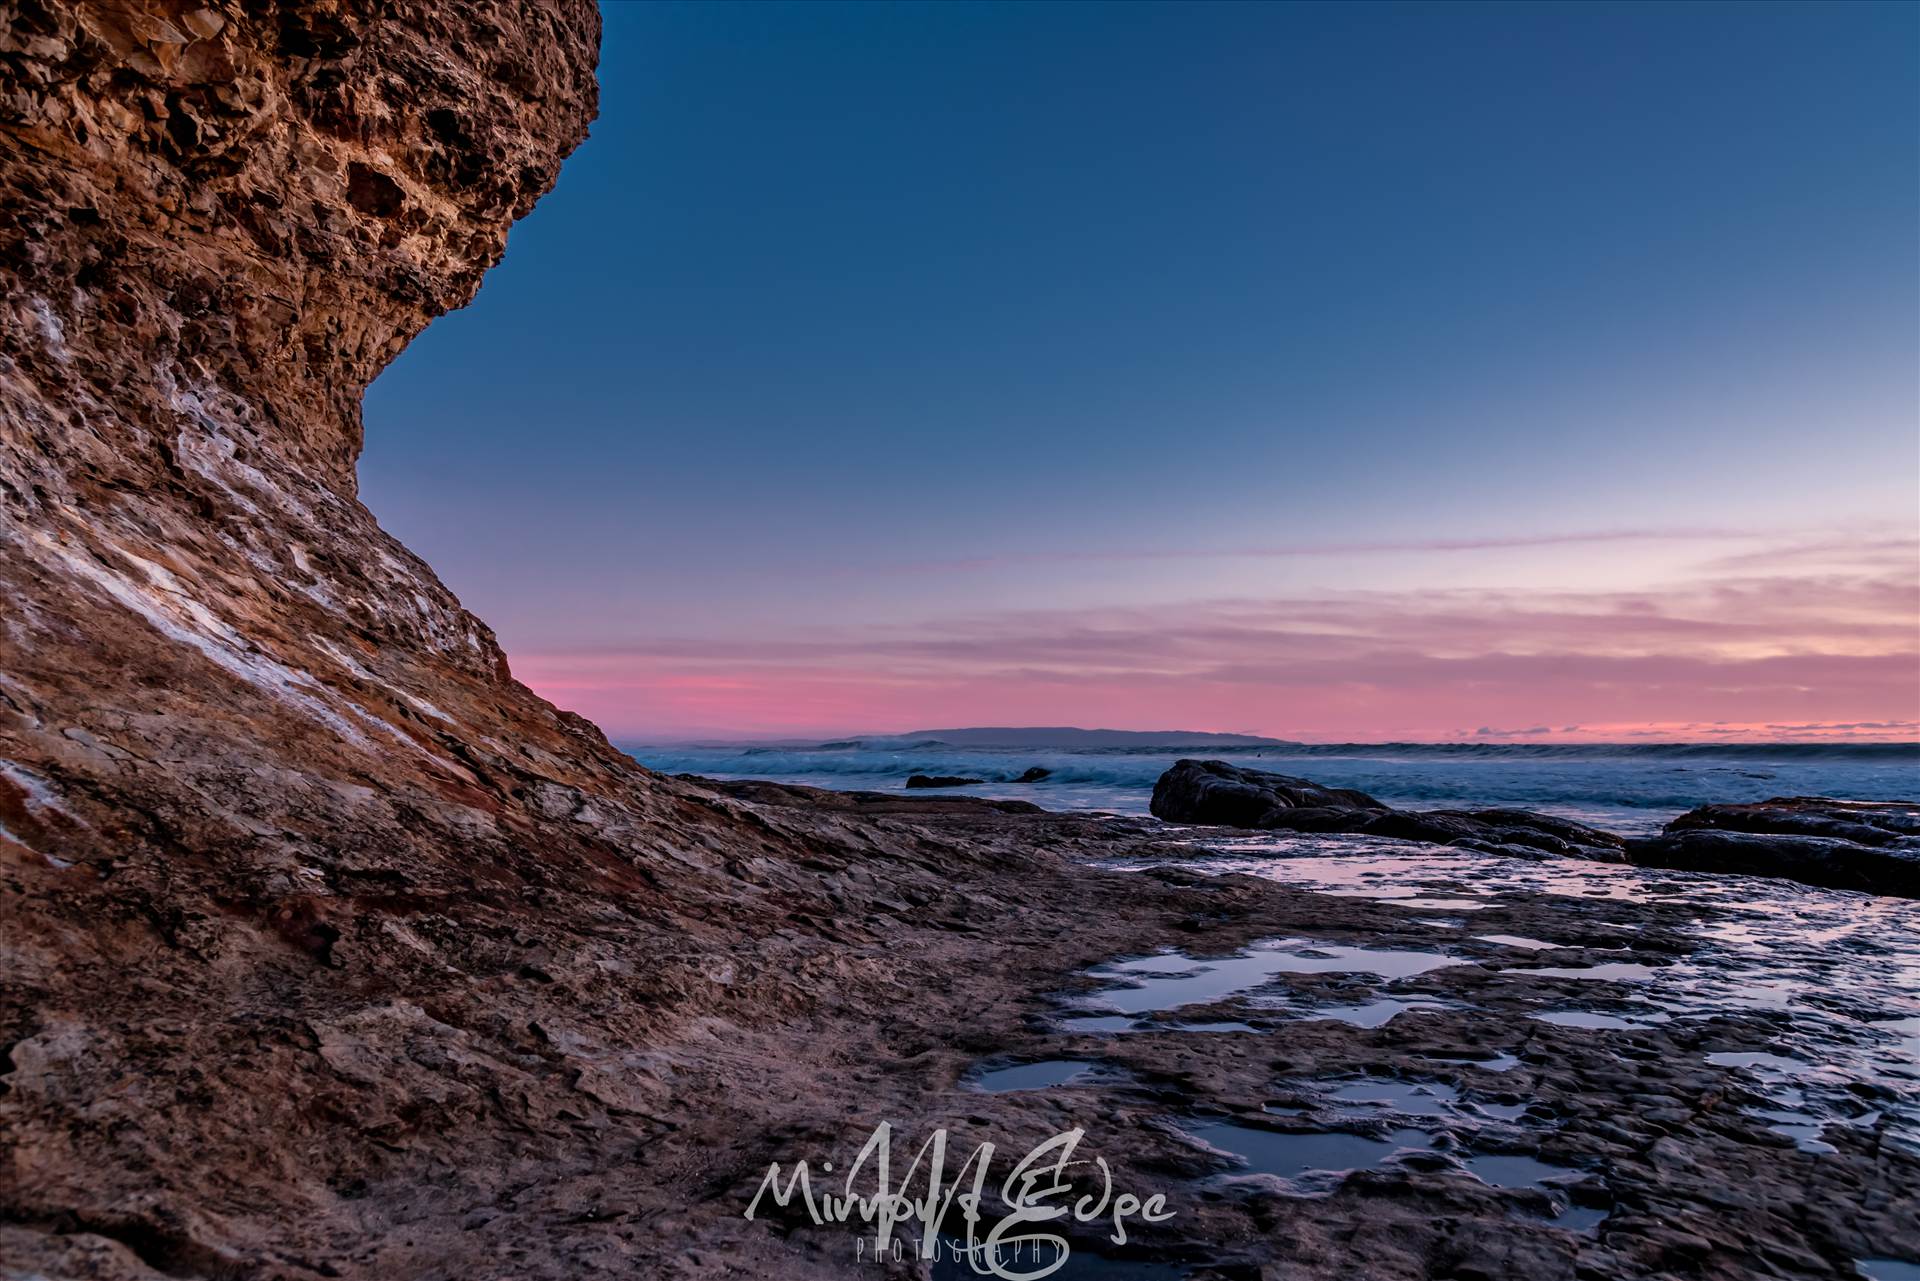 Shell Beach Cliff Pink Sunset.jpg undefined by Sarah Williams